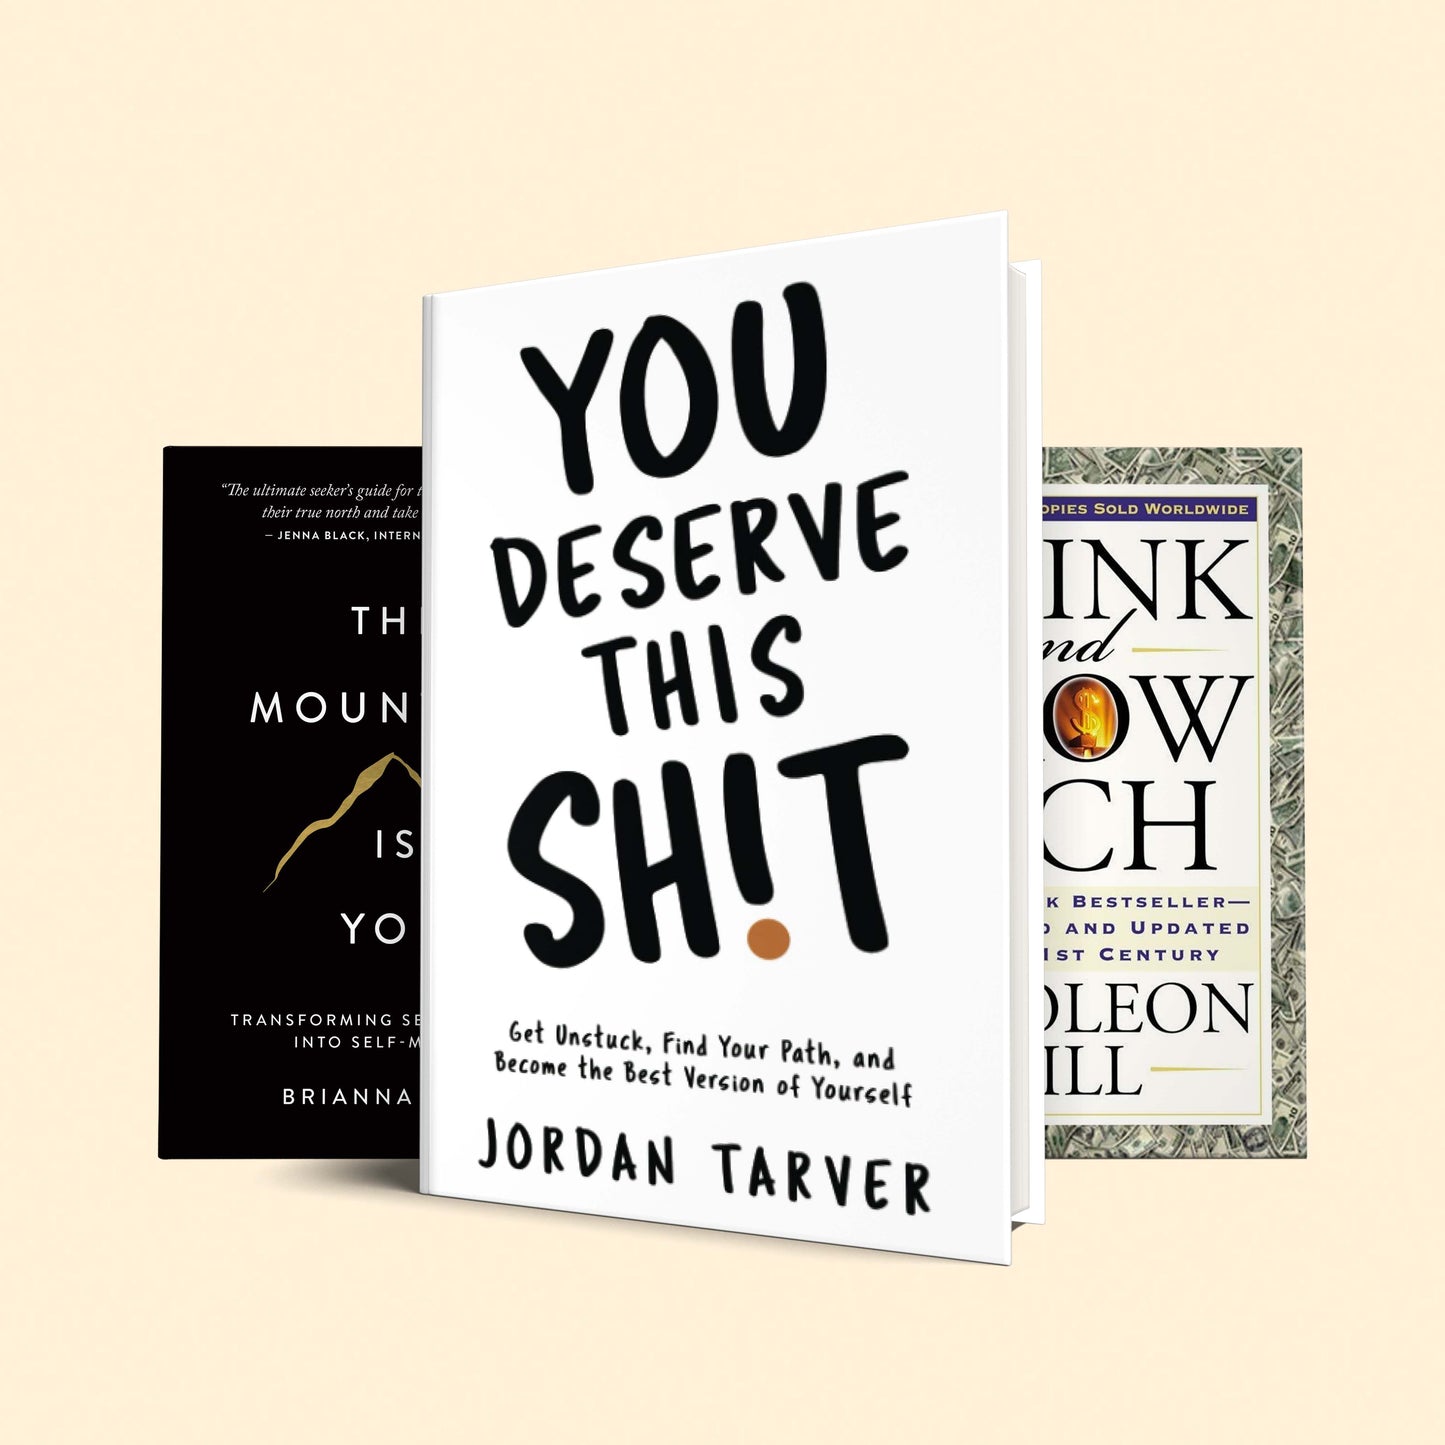 3 books to change the way you think in 2023 : Think & grow rich, You deserve this sh*t, The mountain is you